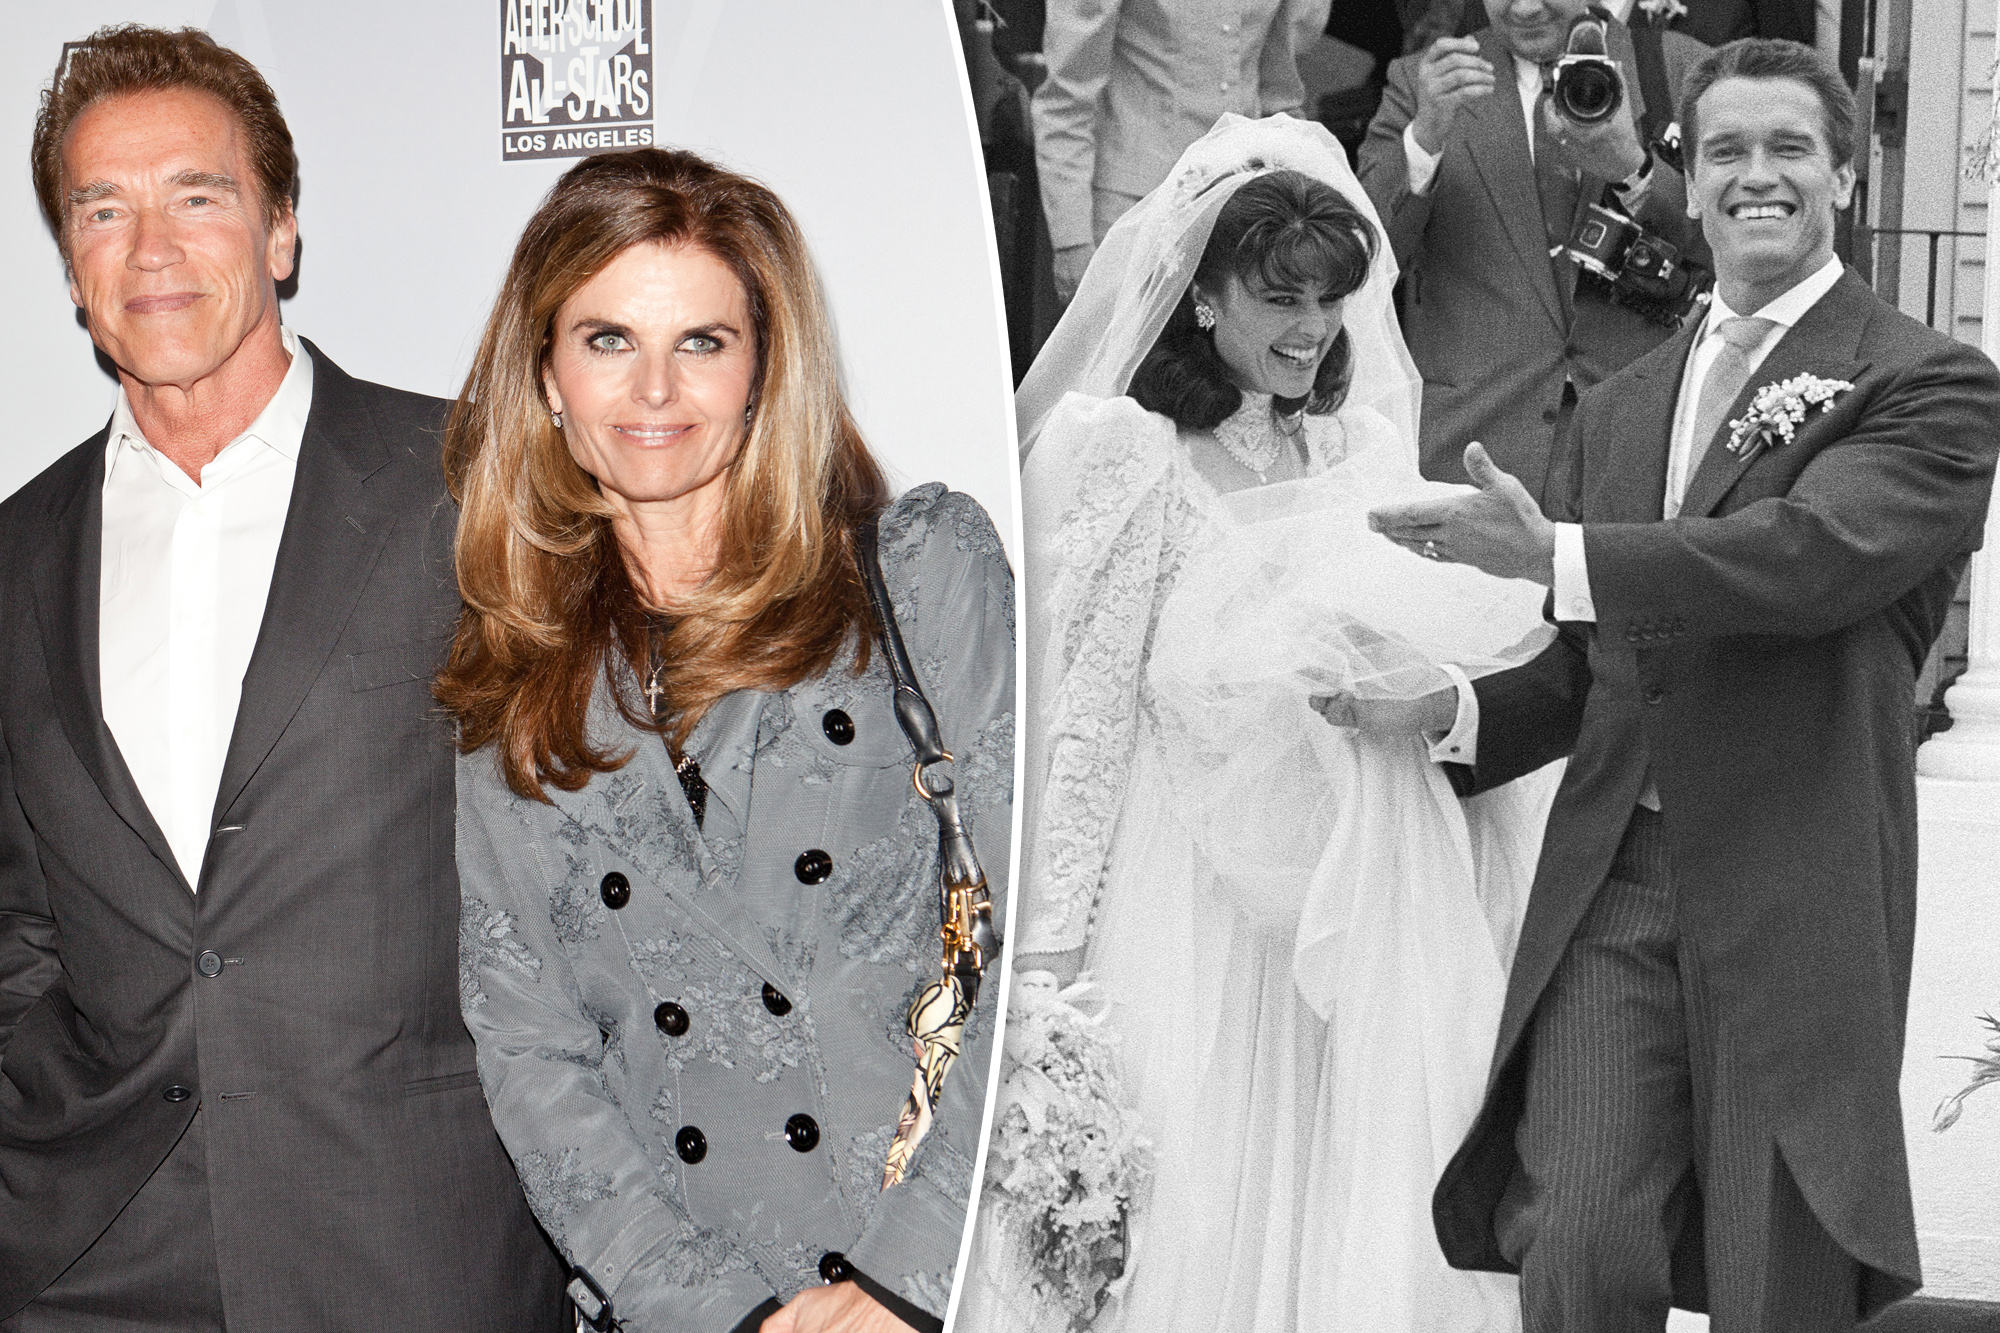 Maria Shriver Goes Make-Up Free As Arnold Schwarzenegger's Ex-Wife Seen Out